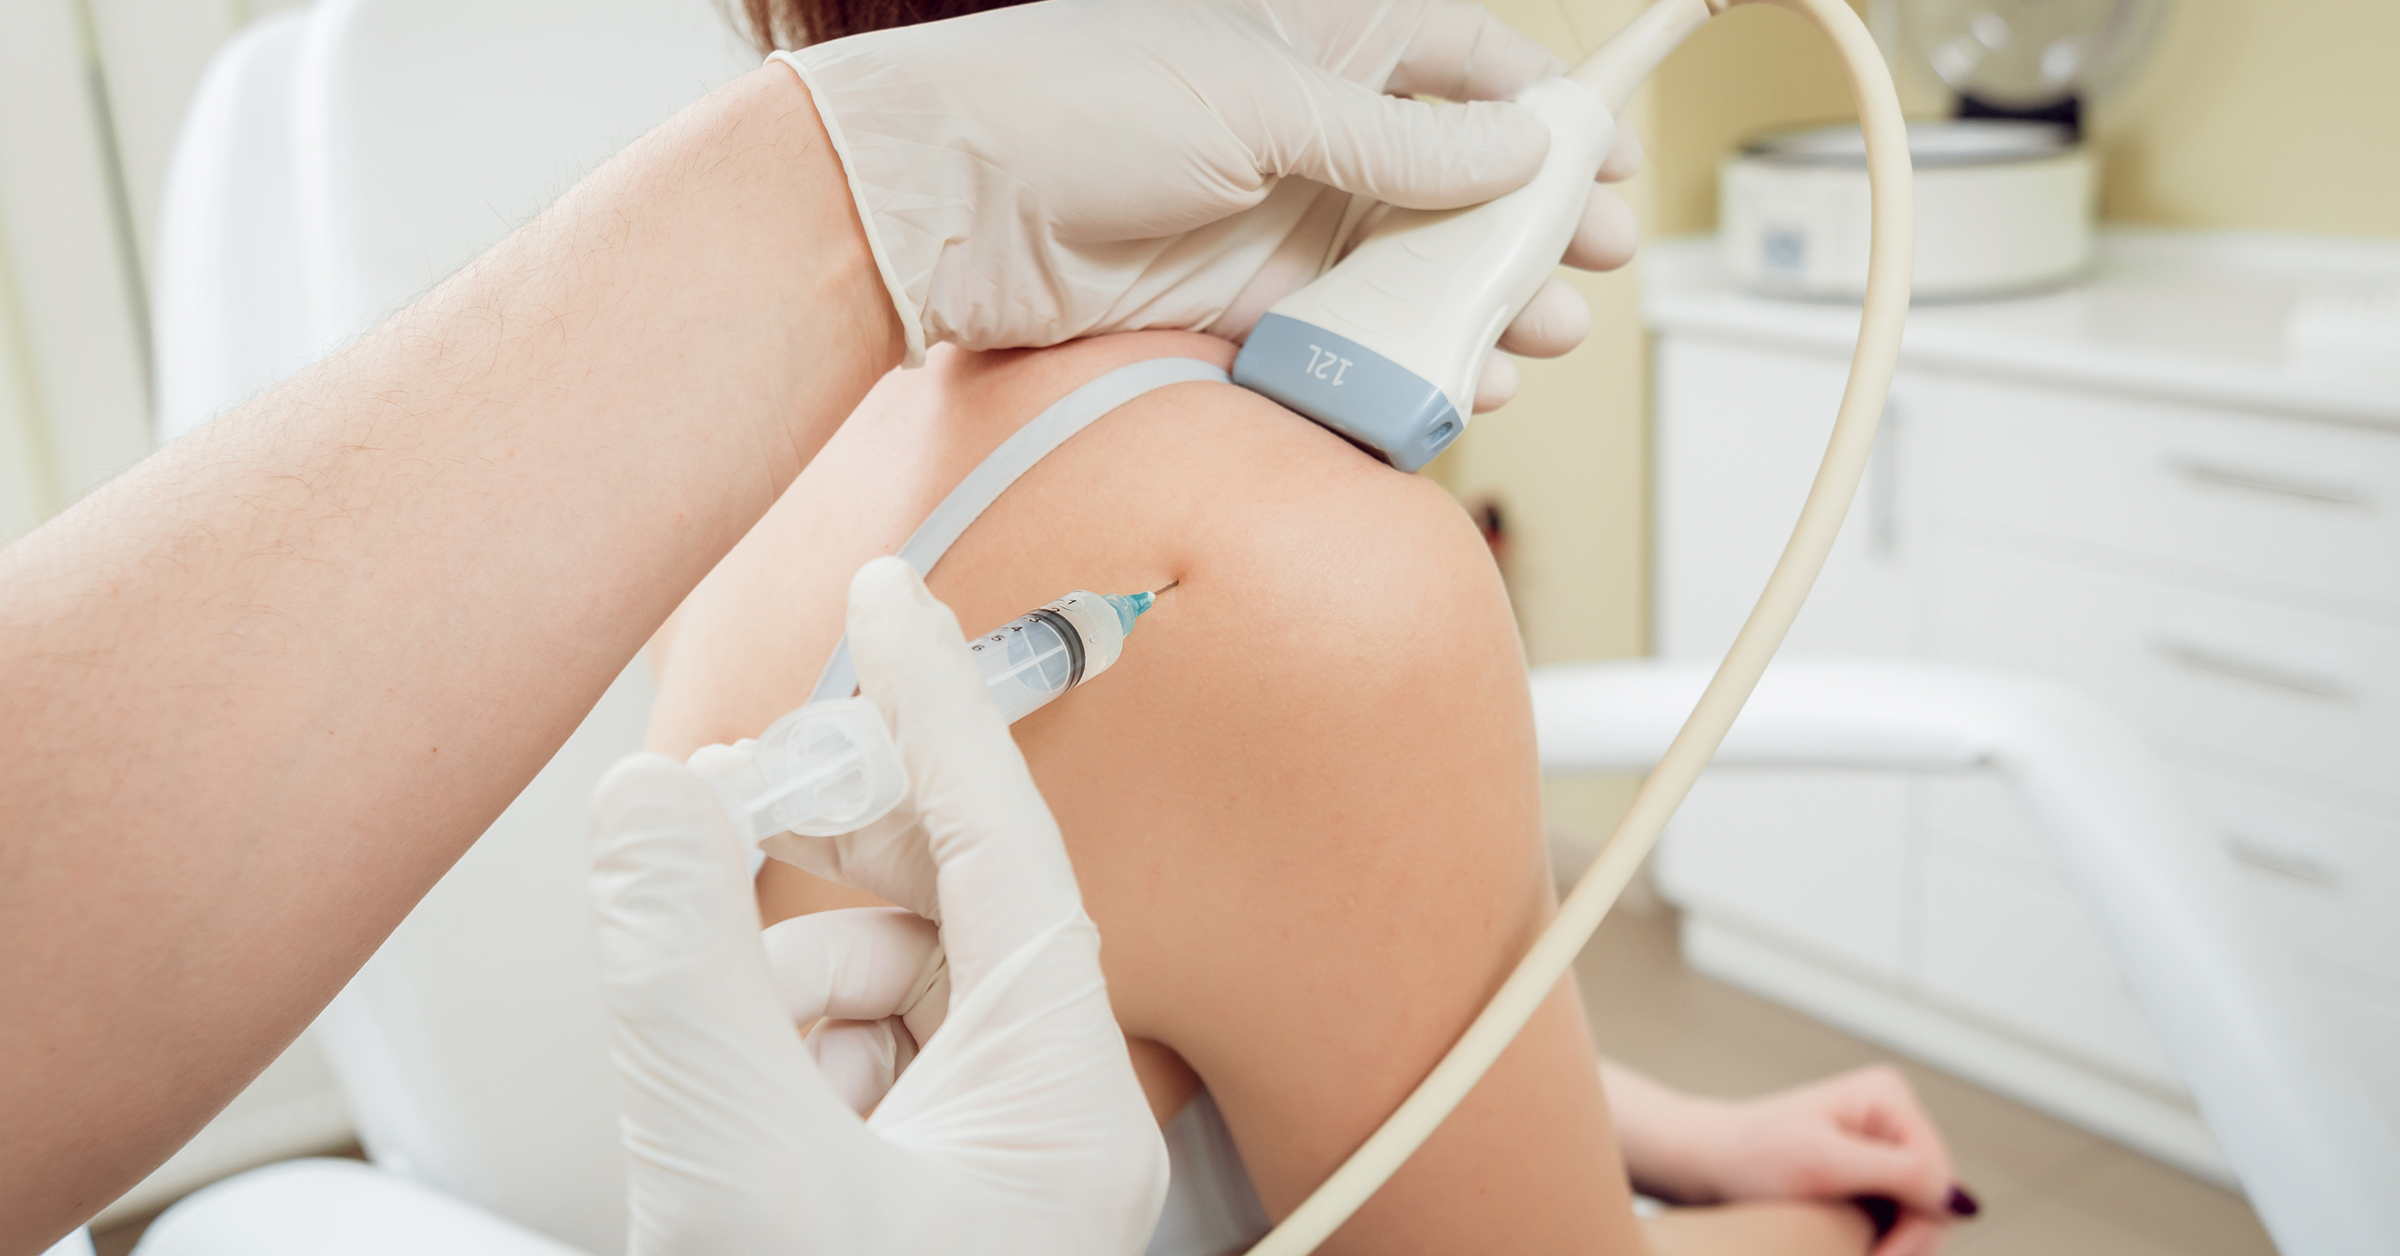 Why Get PRP Injections?